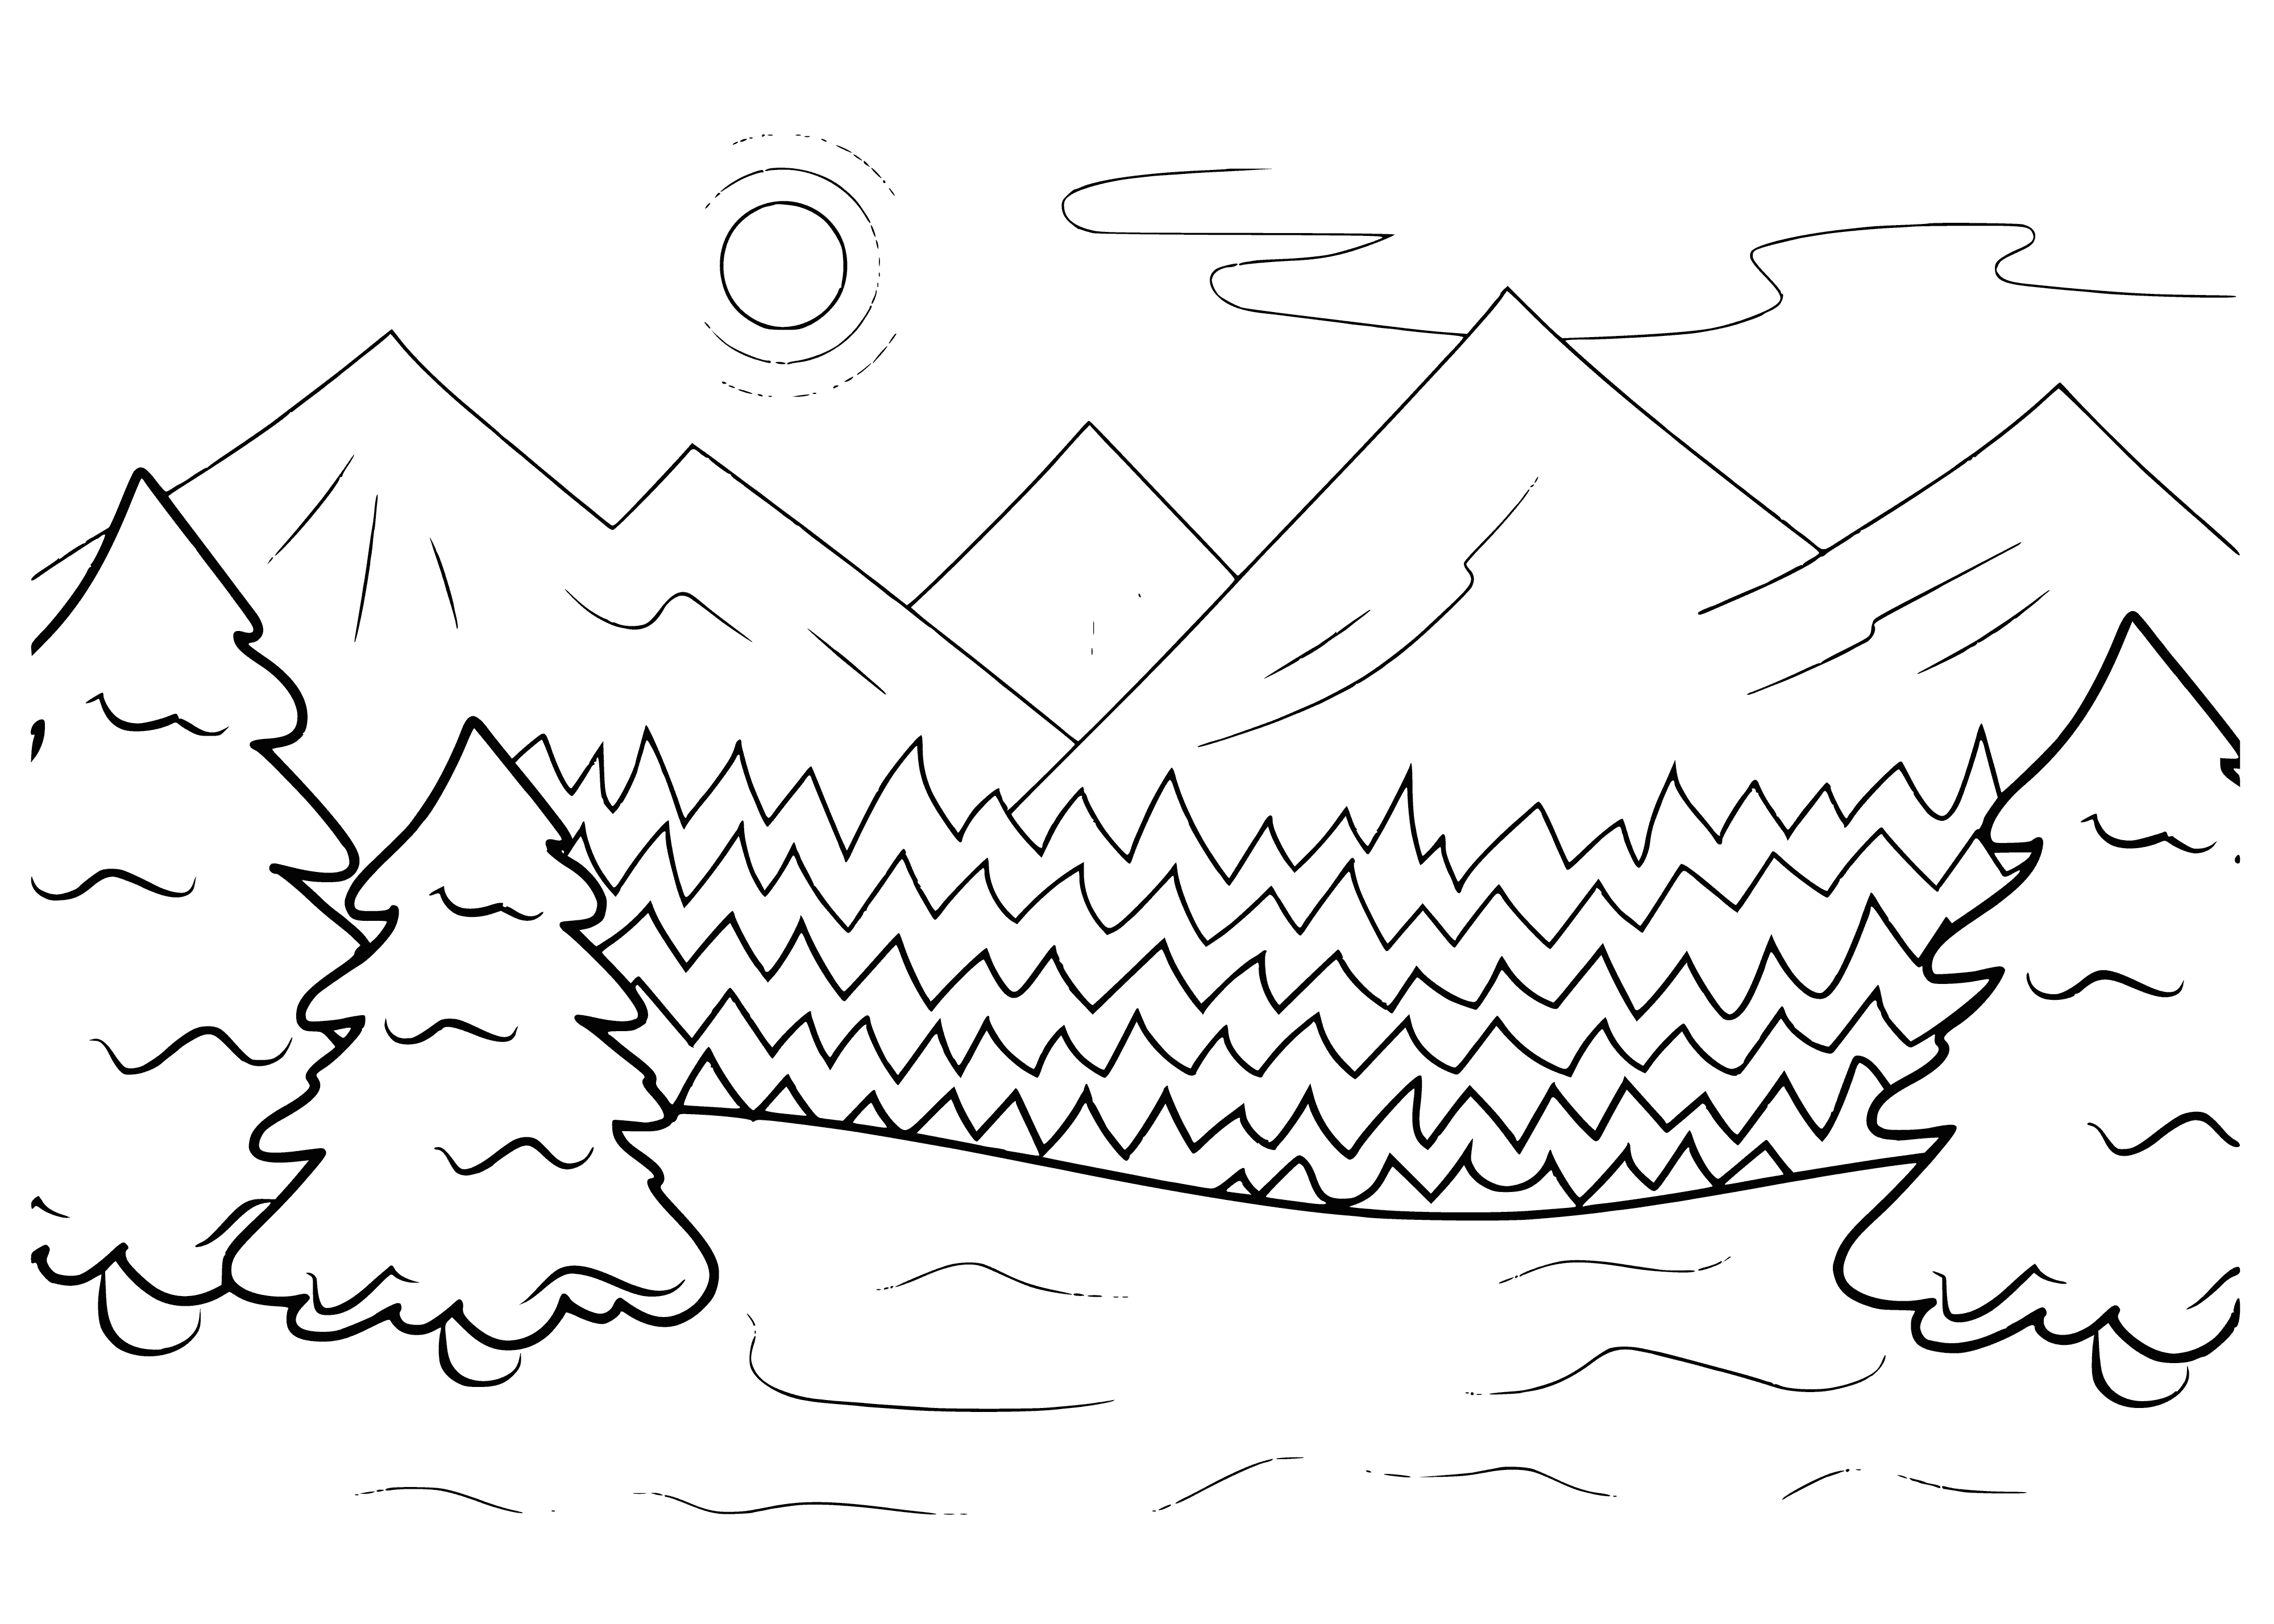 coloring page: Snowy mountains in the distance, leafless trees in the valley and a river running through. Winter in full force. #WinterWonderland